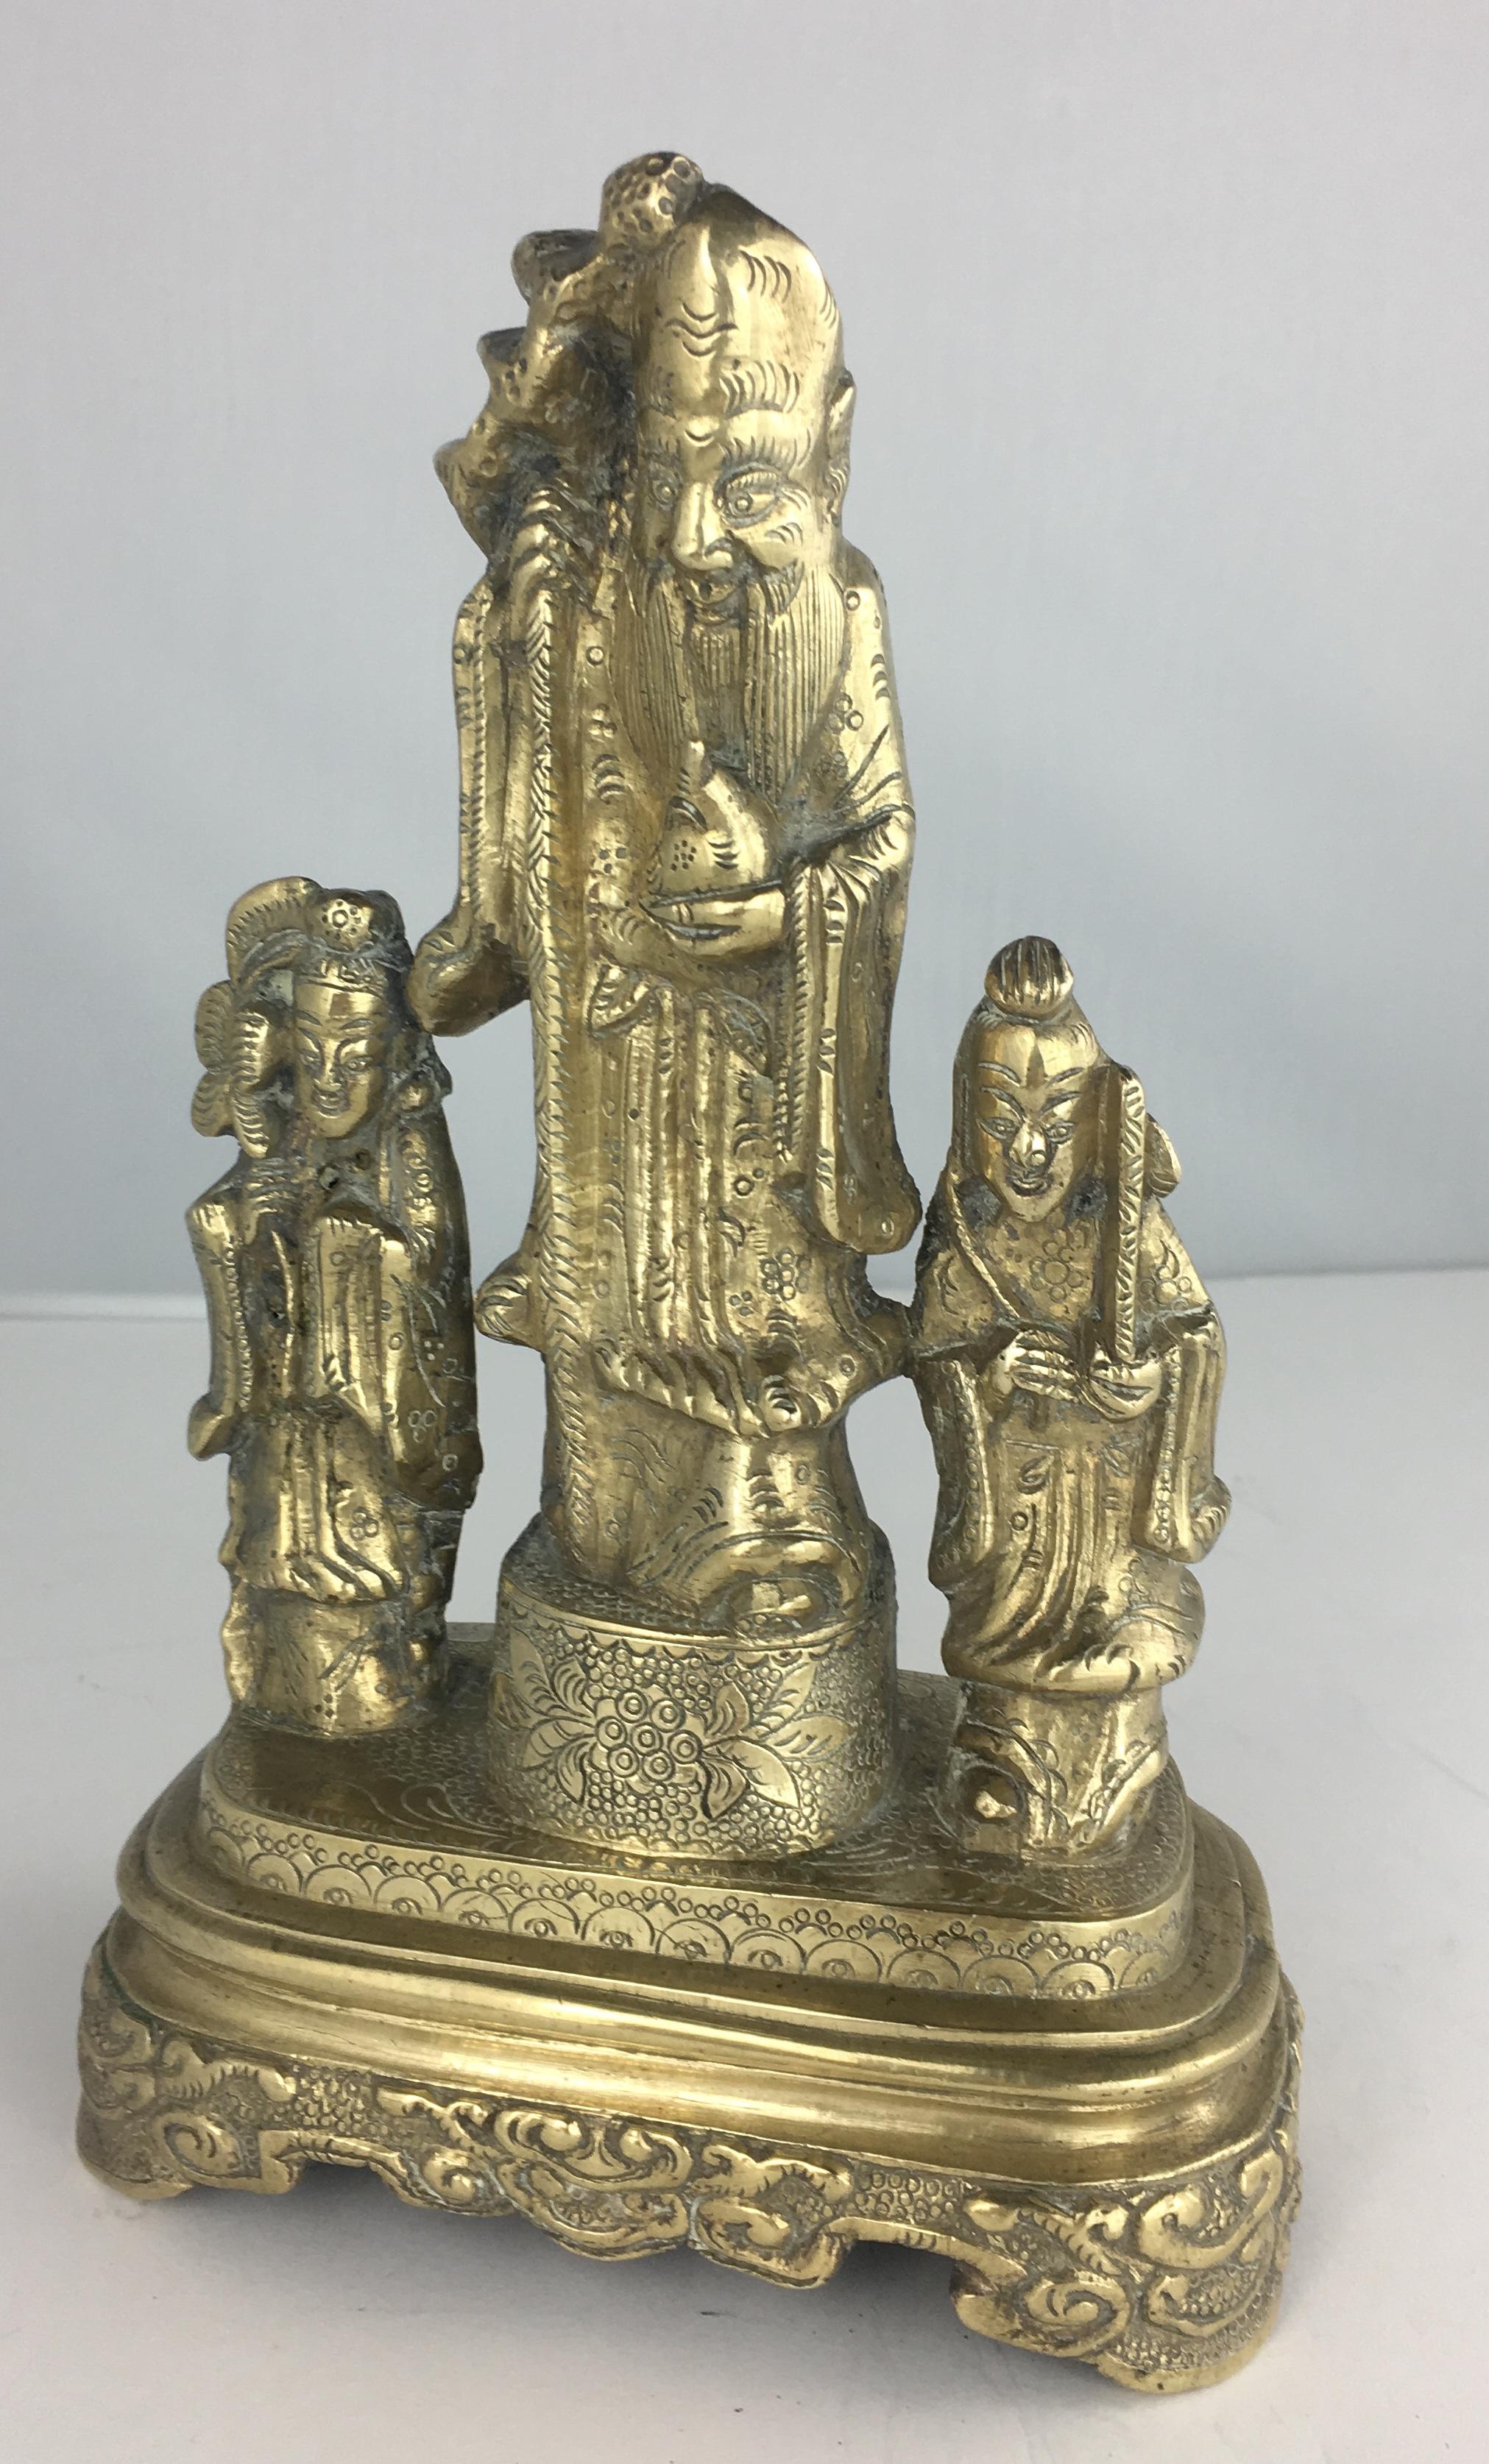 Finely detailed antique bronze of three Chinese figures with a wonderful patina. A beautiful and bold conversation piece for any home. 
Measures: 7 3/4